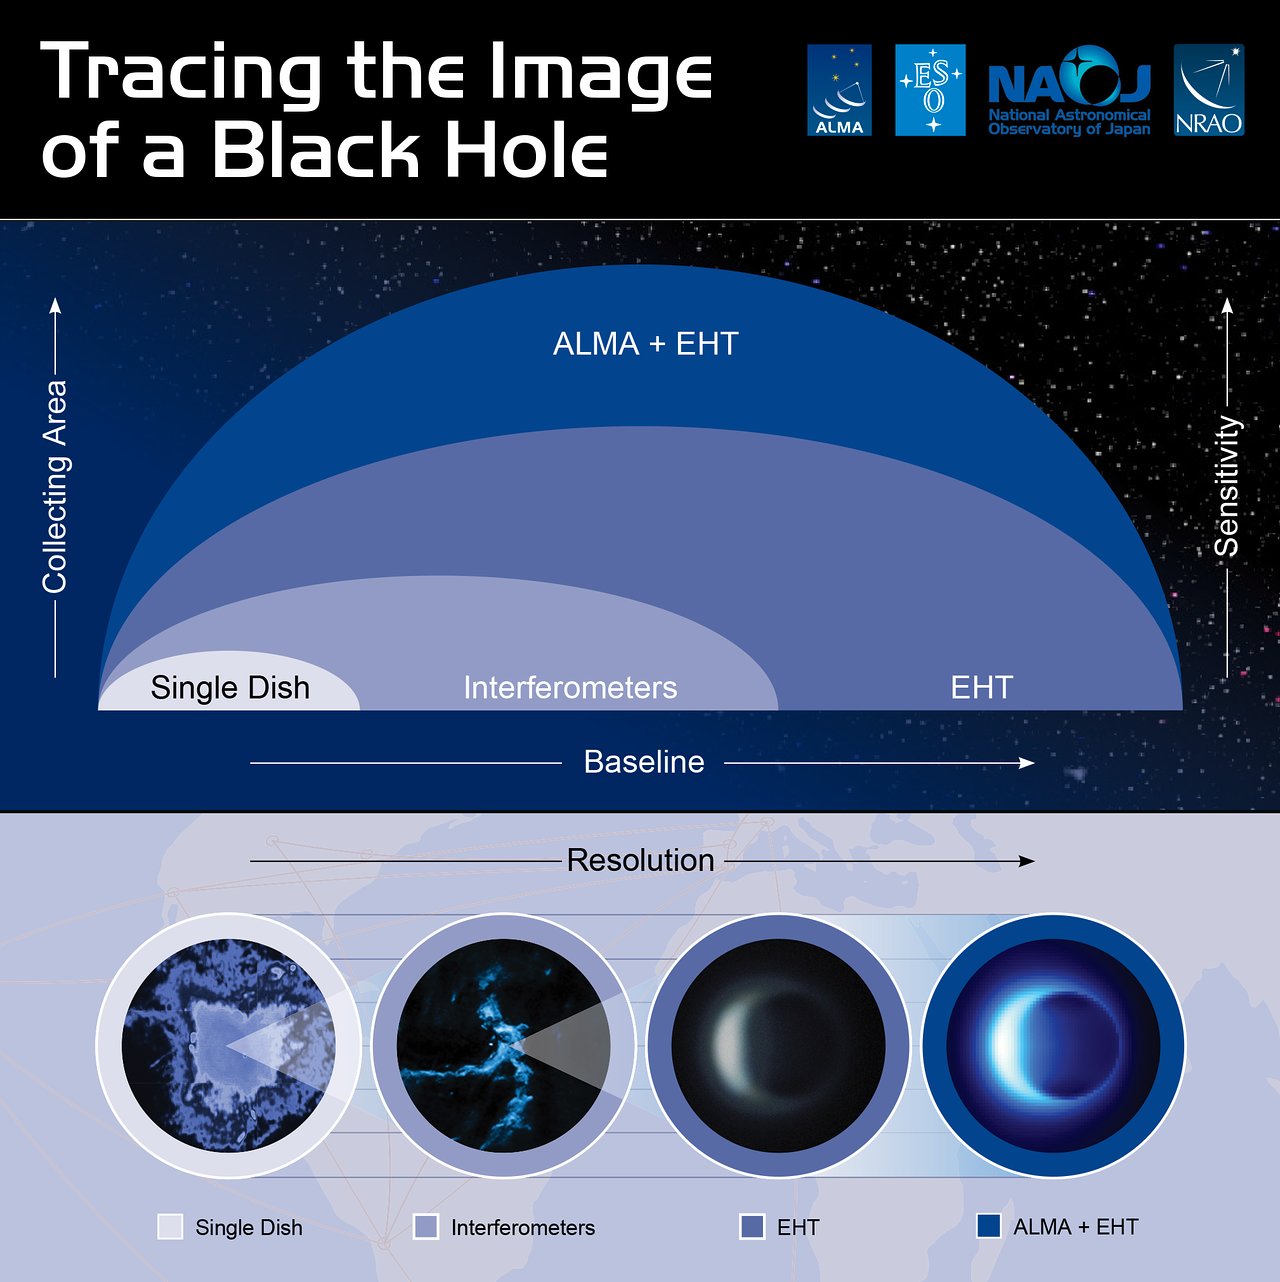 This infographic illustrates how ALMA contributes to the EHT observation